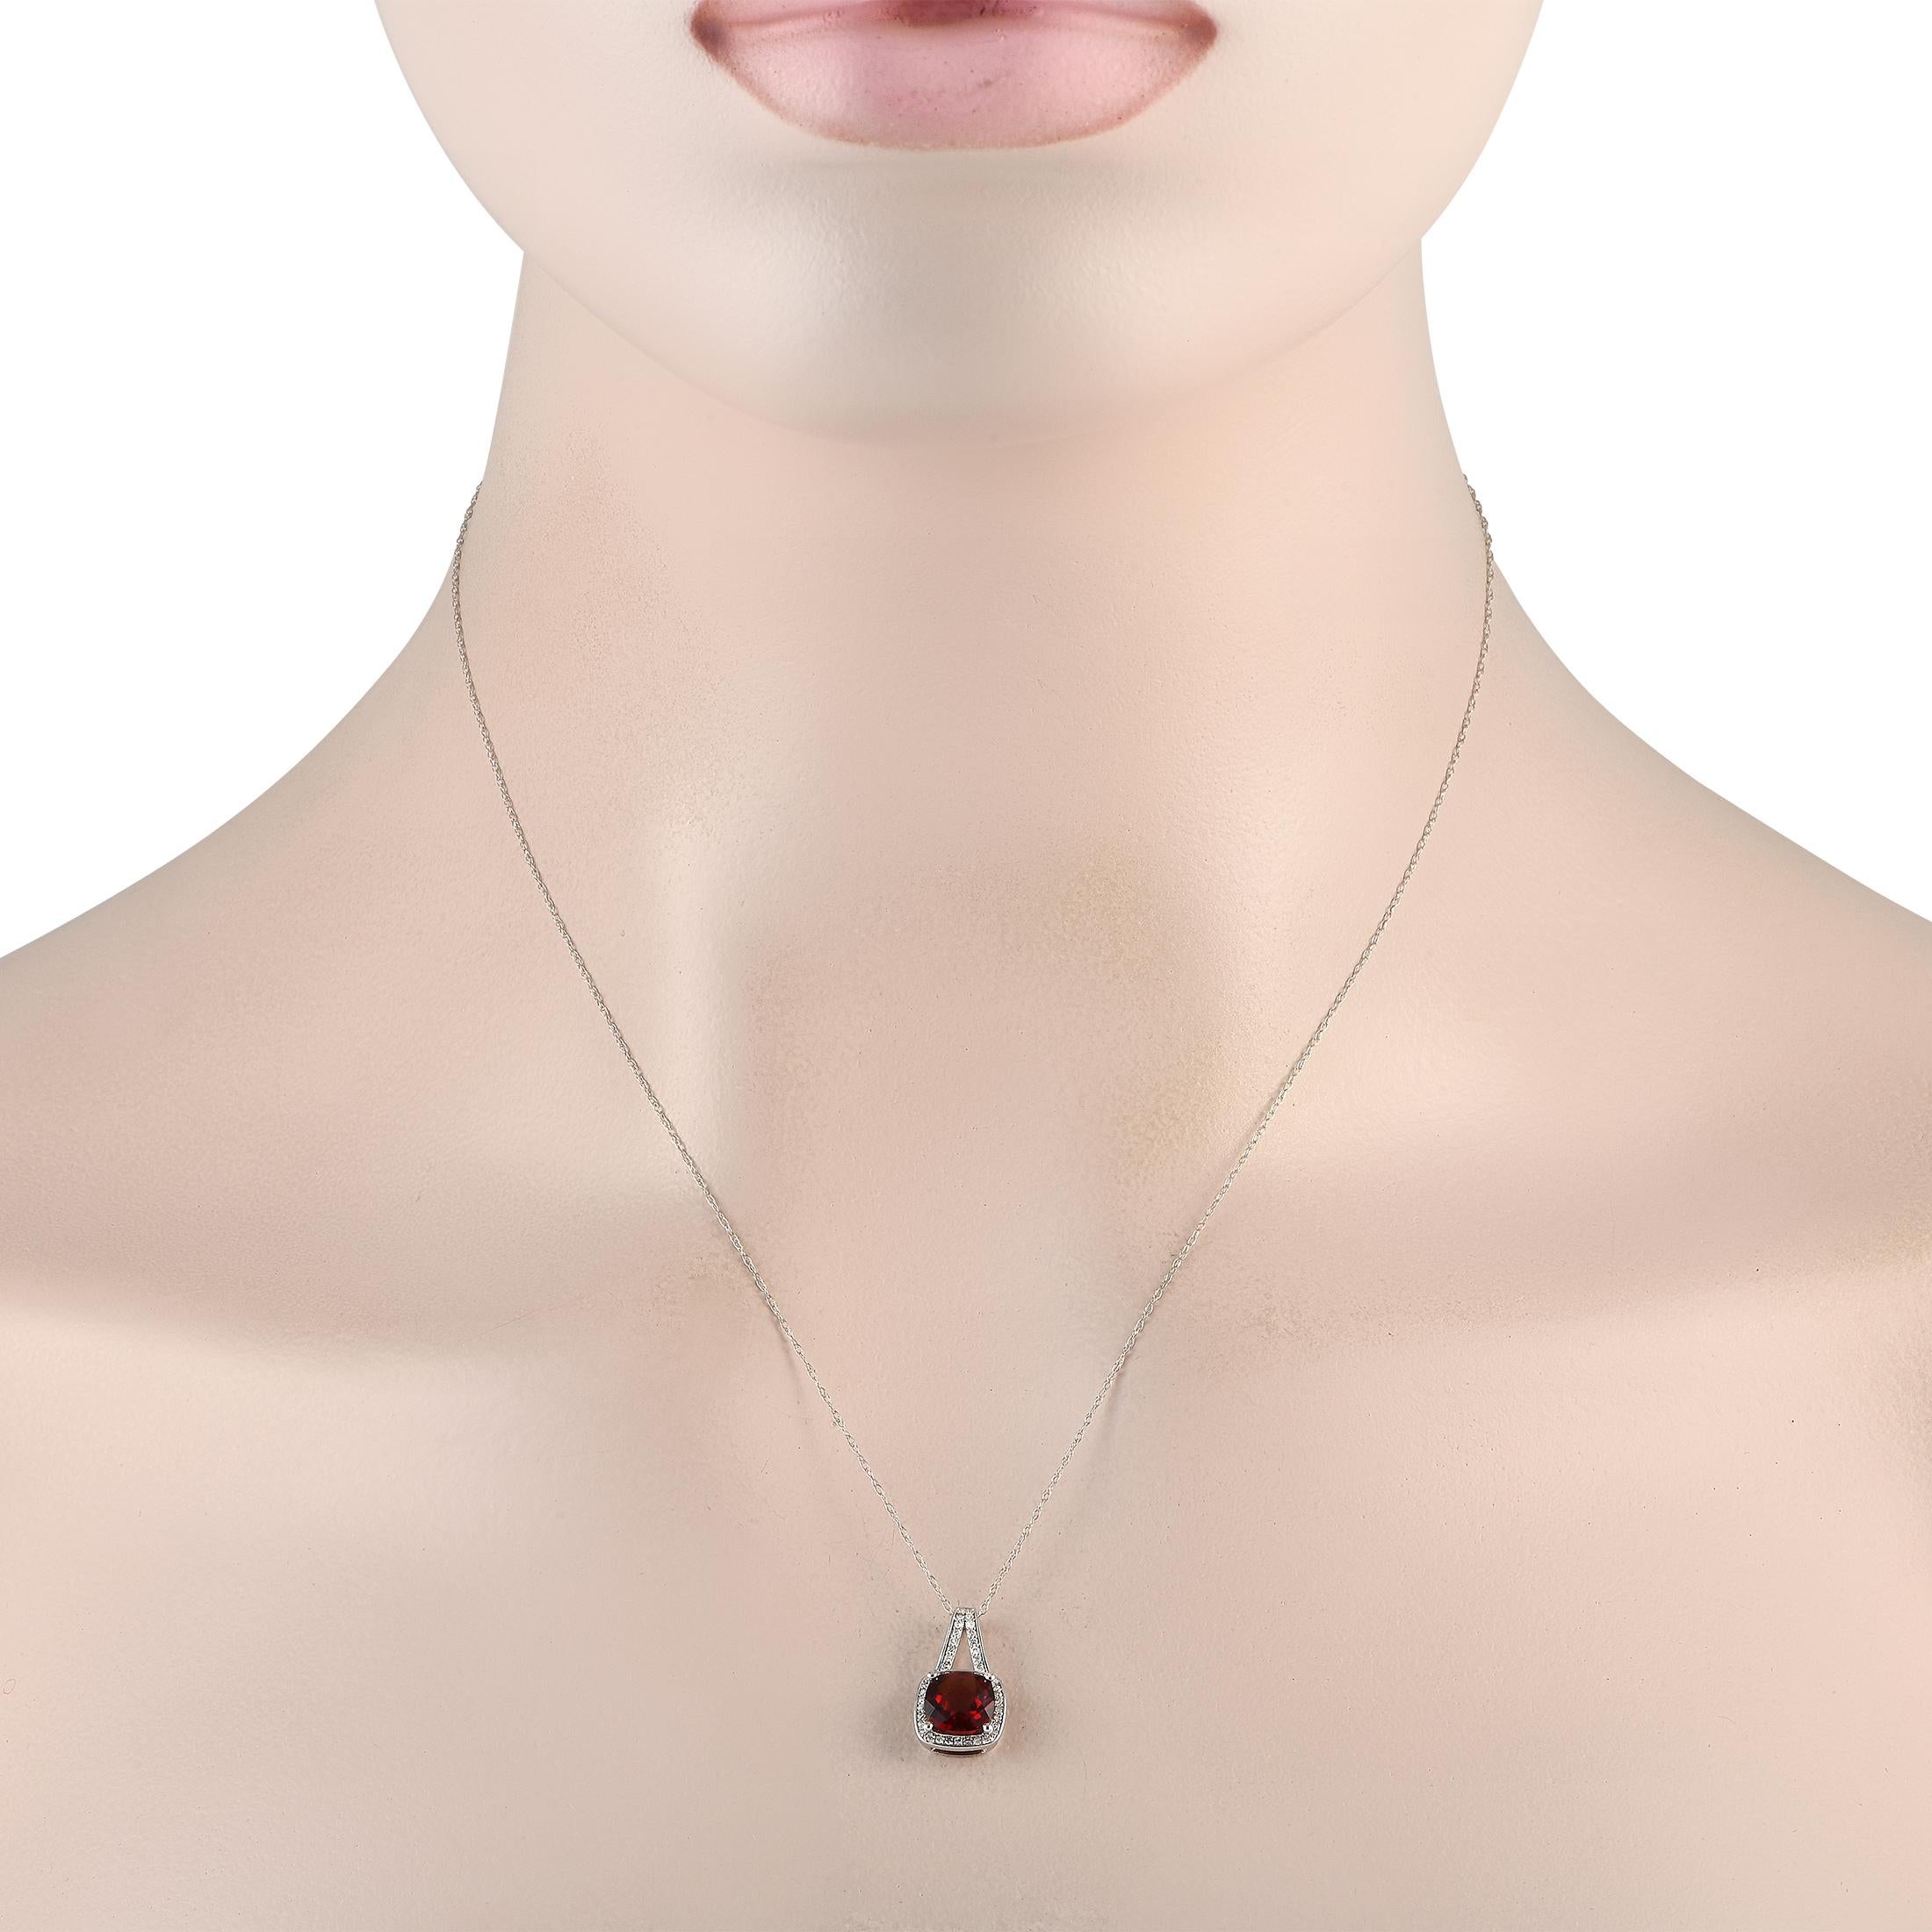 Attract wealth, wisdom, and love by wearing this LB Exclusive garnet necklace. It bears a deep red ruby gemstone believed to be a symbol of prosperity, sagacity, and passion. The 0.65 by 0.45 pendant has a white gold frame, with petite diamonds